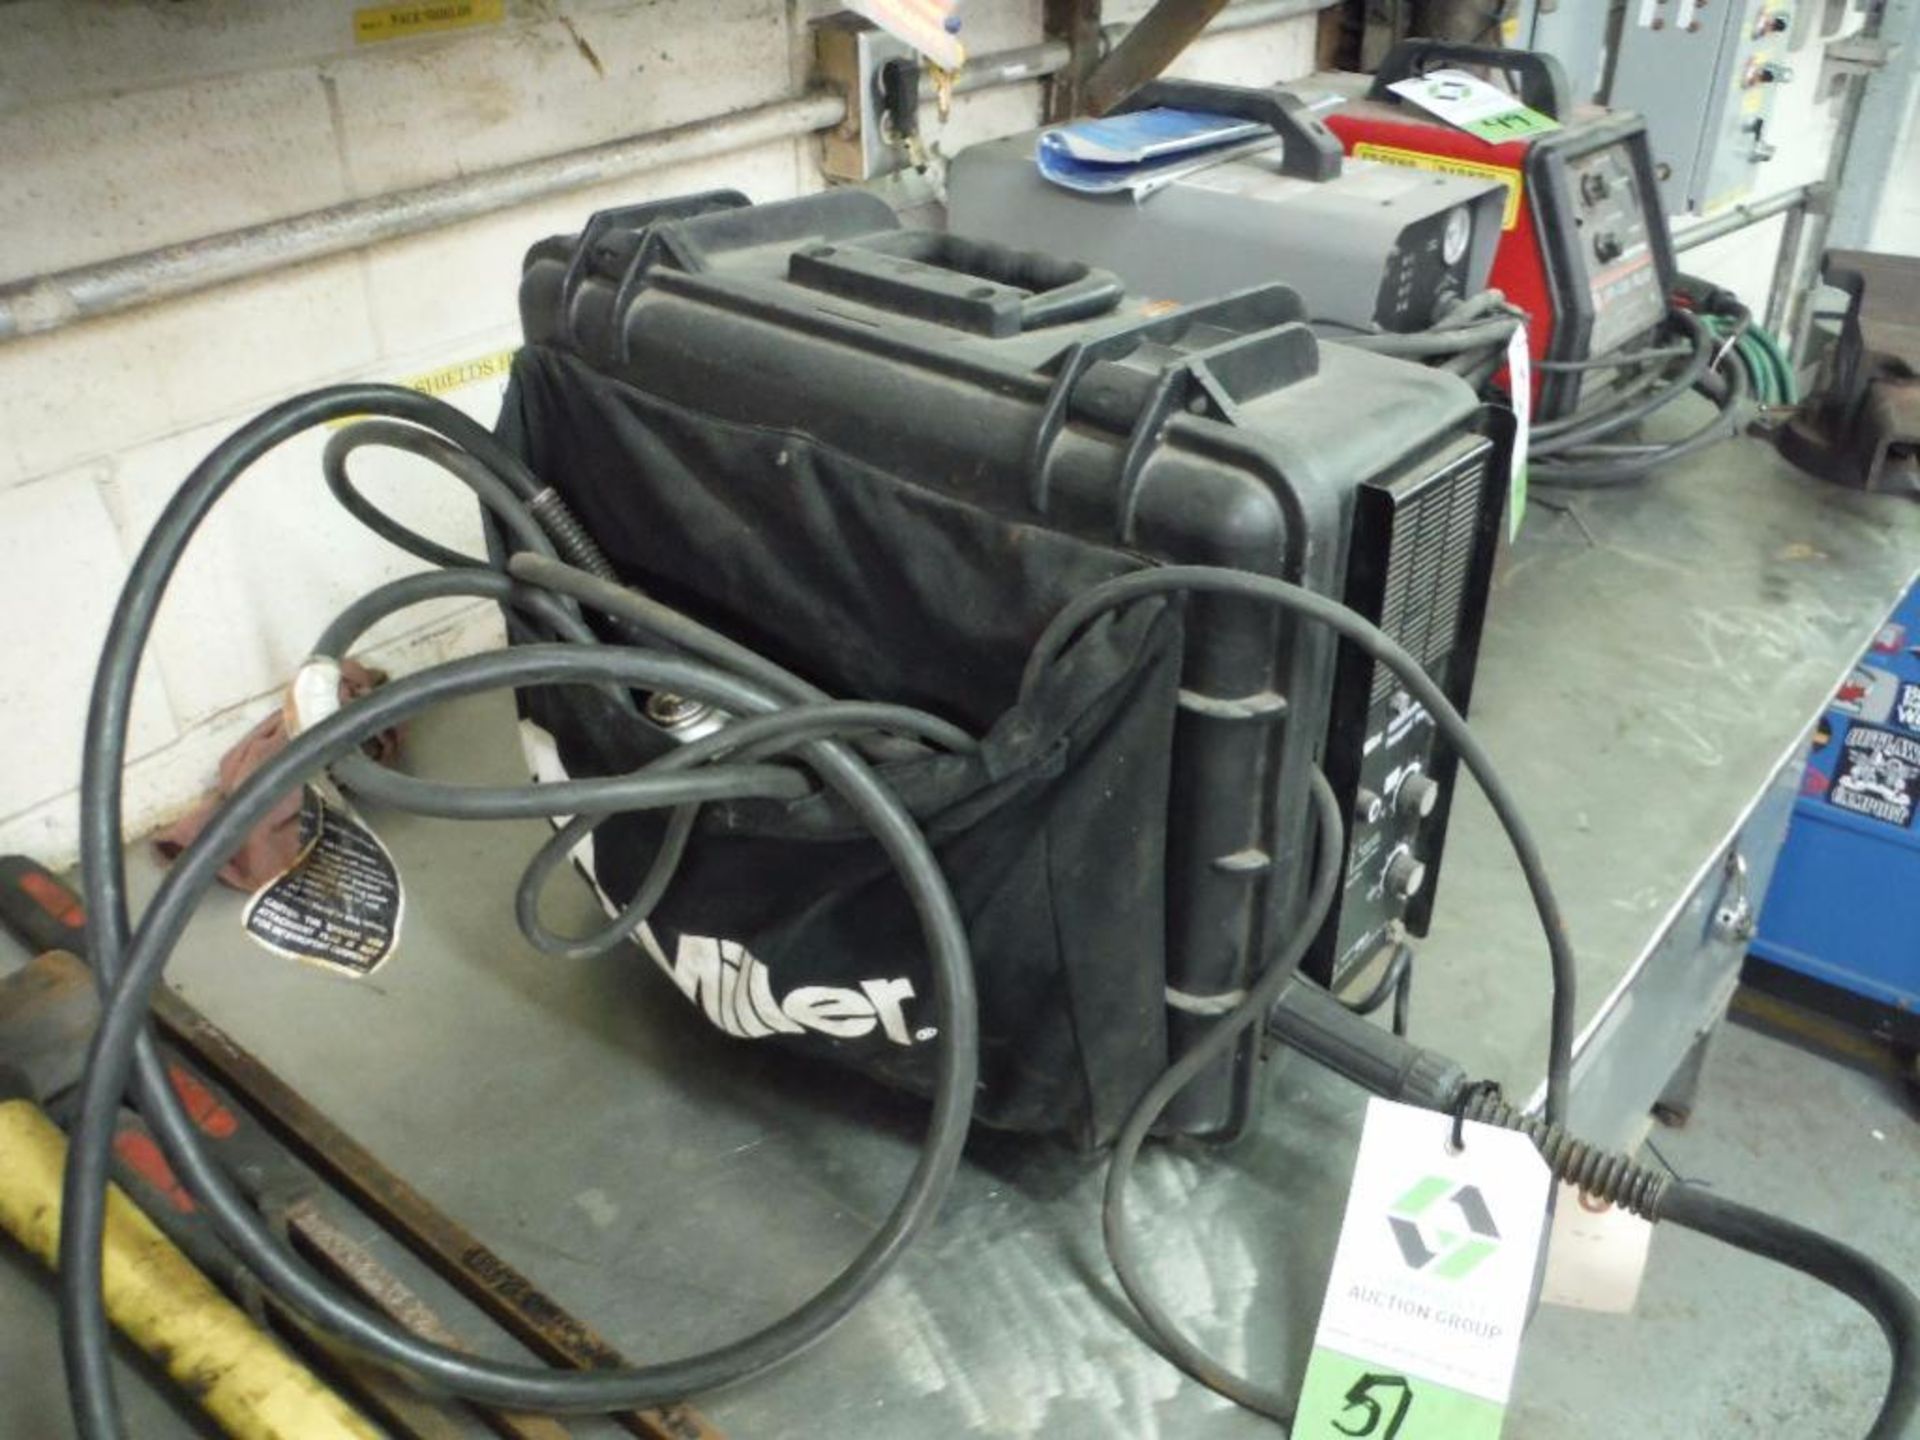 Millermatic passport plus wire feed welder, 115/230 volts ** Rigging Fee: $25 ** - Image 2 of 7